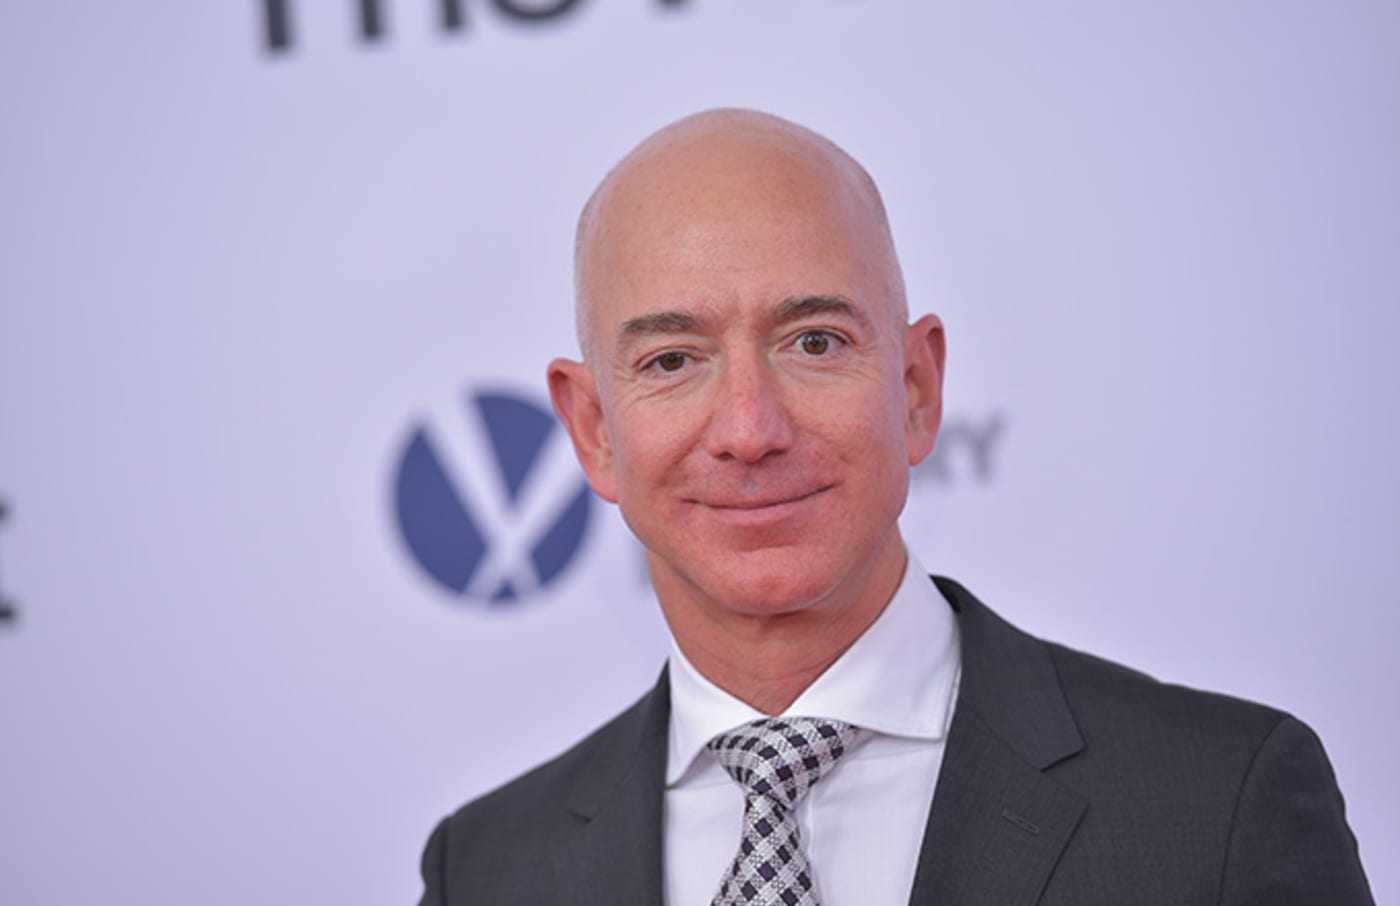 This is a photo of Jeff Bezos.